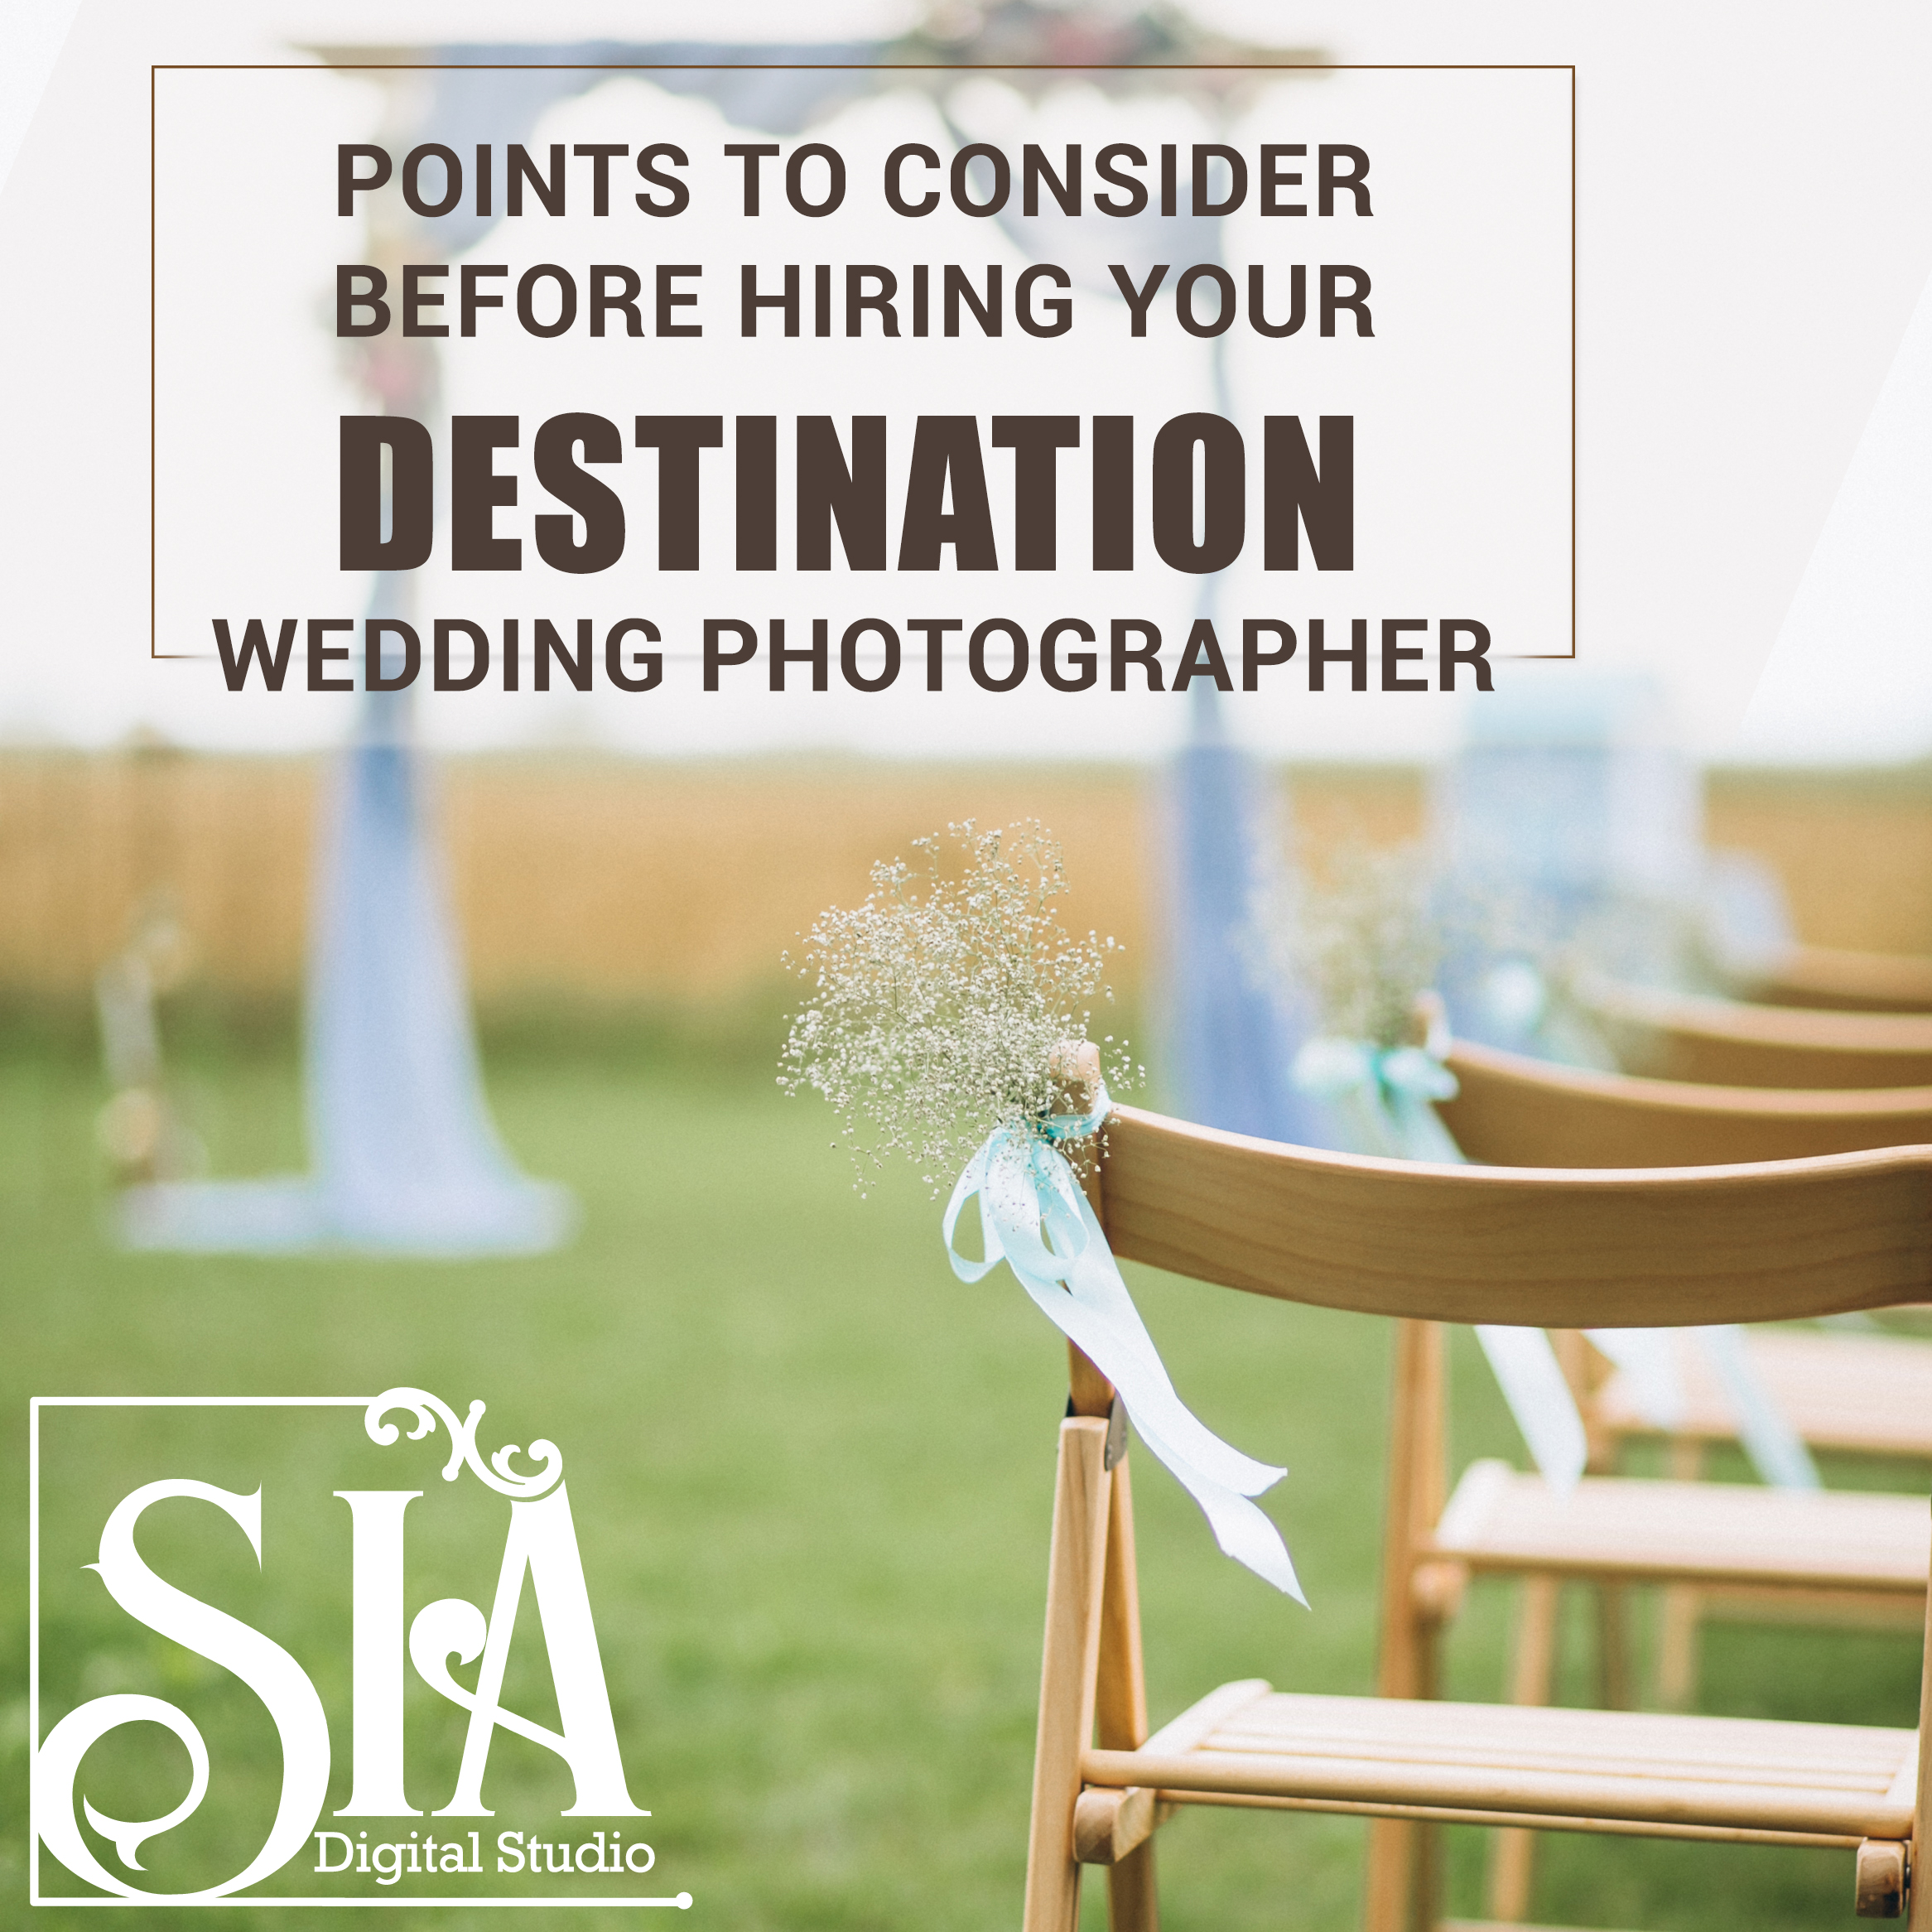 Points To Consider Before Hiring Your Destination Wedding Photographer